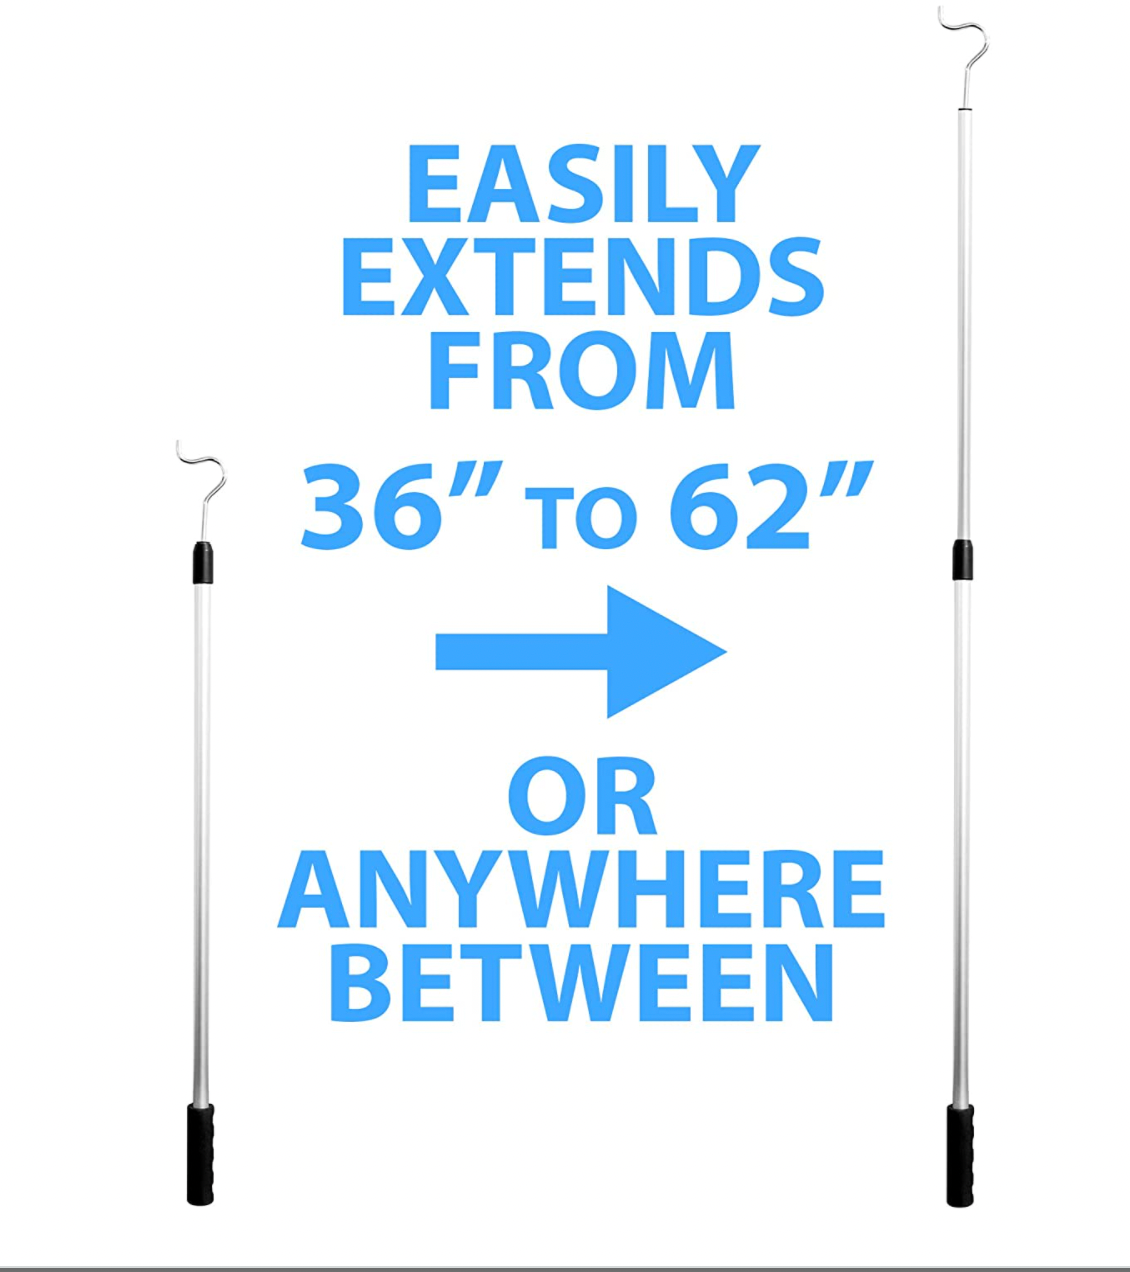 Aluminium Pole Extendable From 36" to 62" - Local Delivery Only